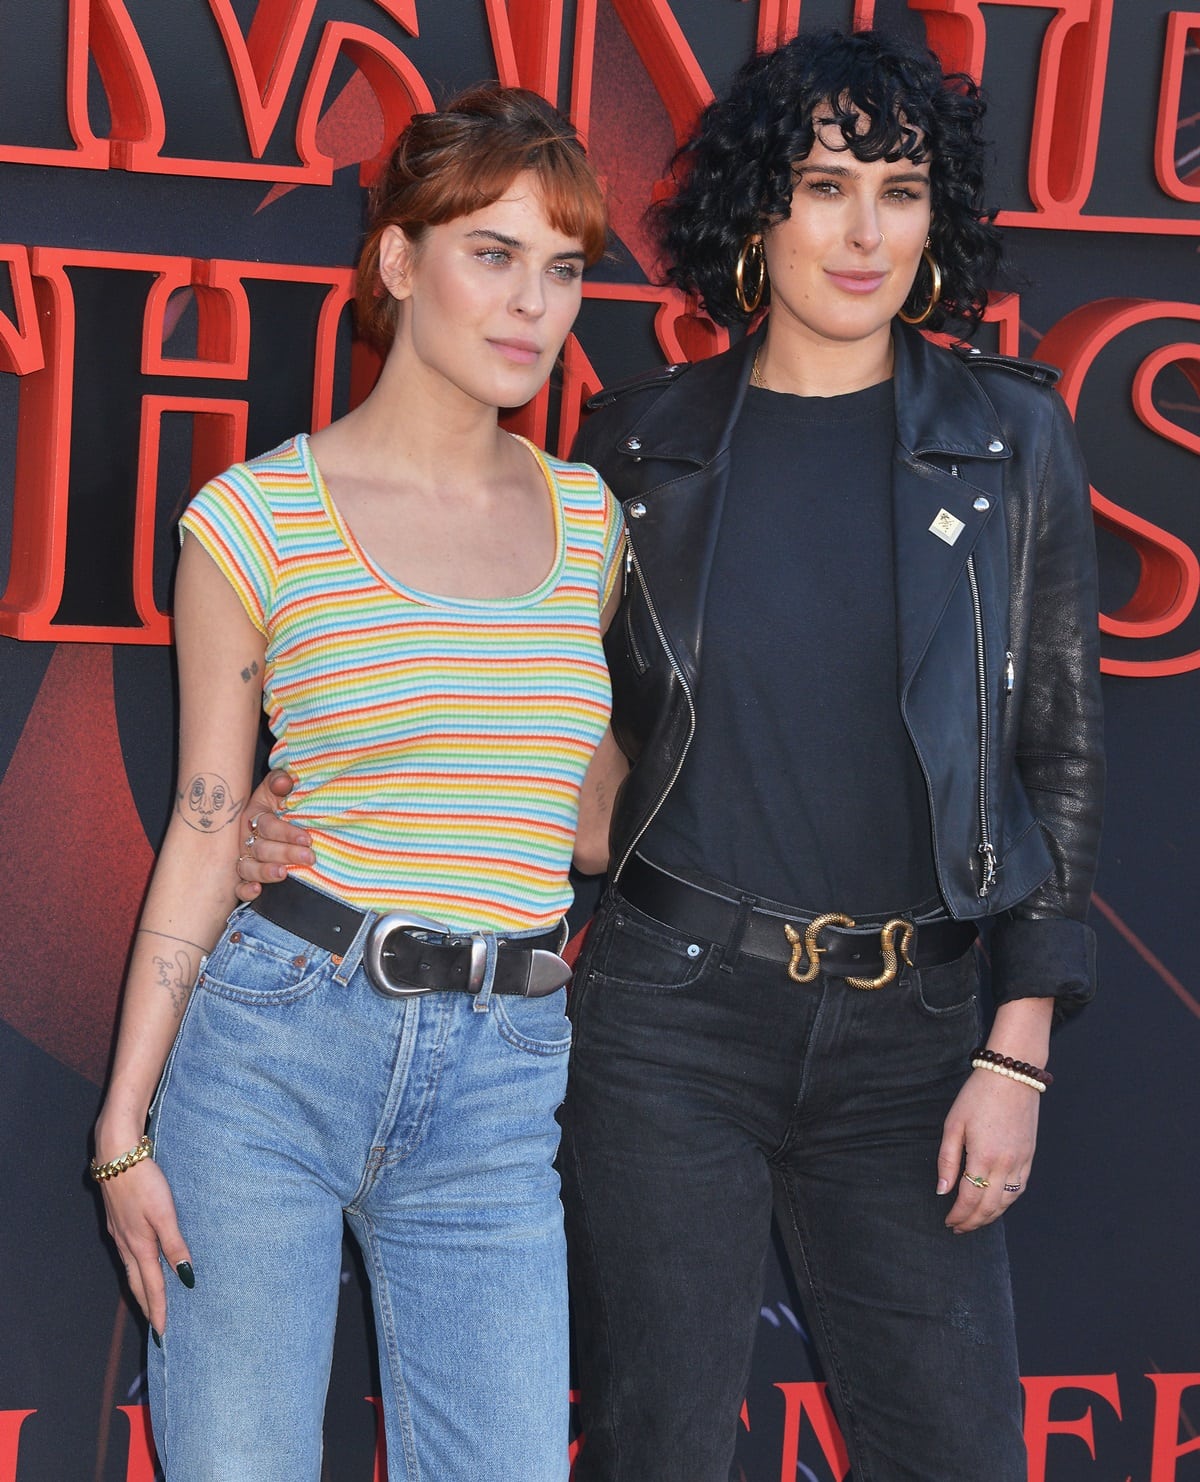 Tallulah Belle Willis has a height of approximately 5 feet 4 inches (1.63 meters), while her sister Rumer Willis stands taller at around 5 feet 6 inches (167.6 centimeters)